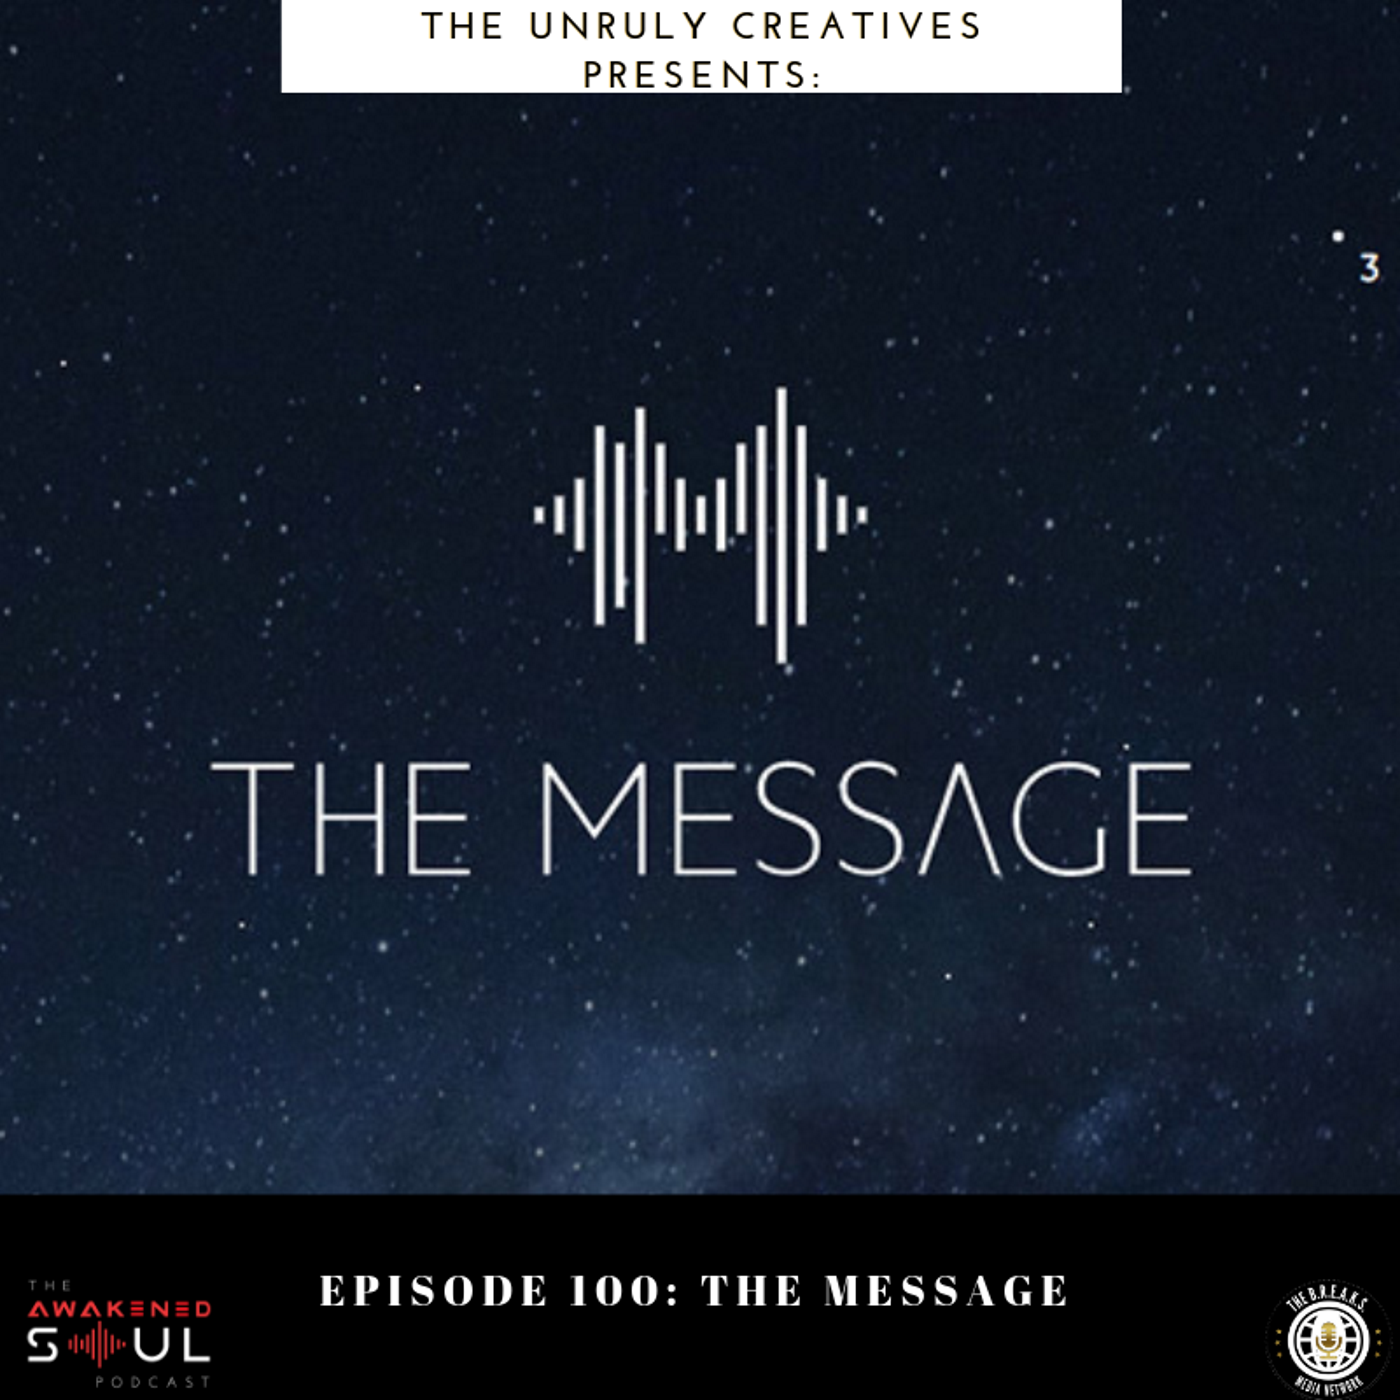 Episode 100: Unruly Creatives The Message